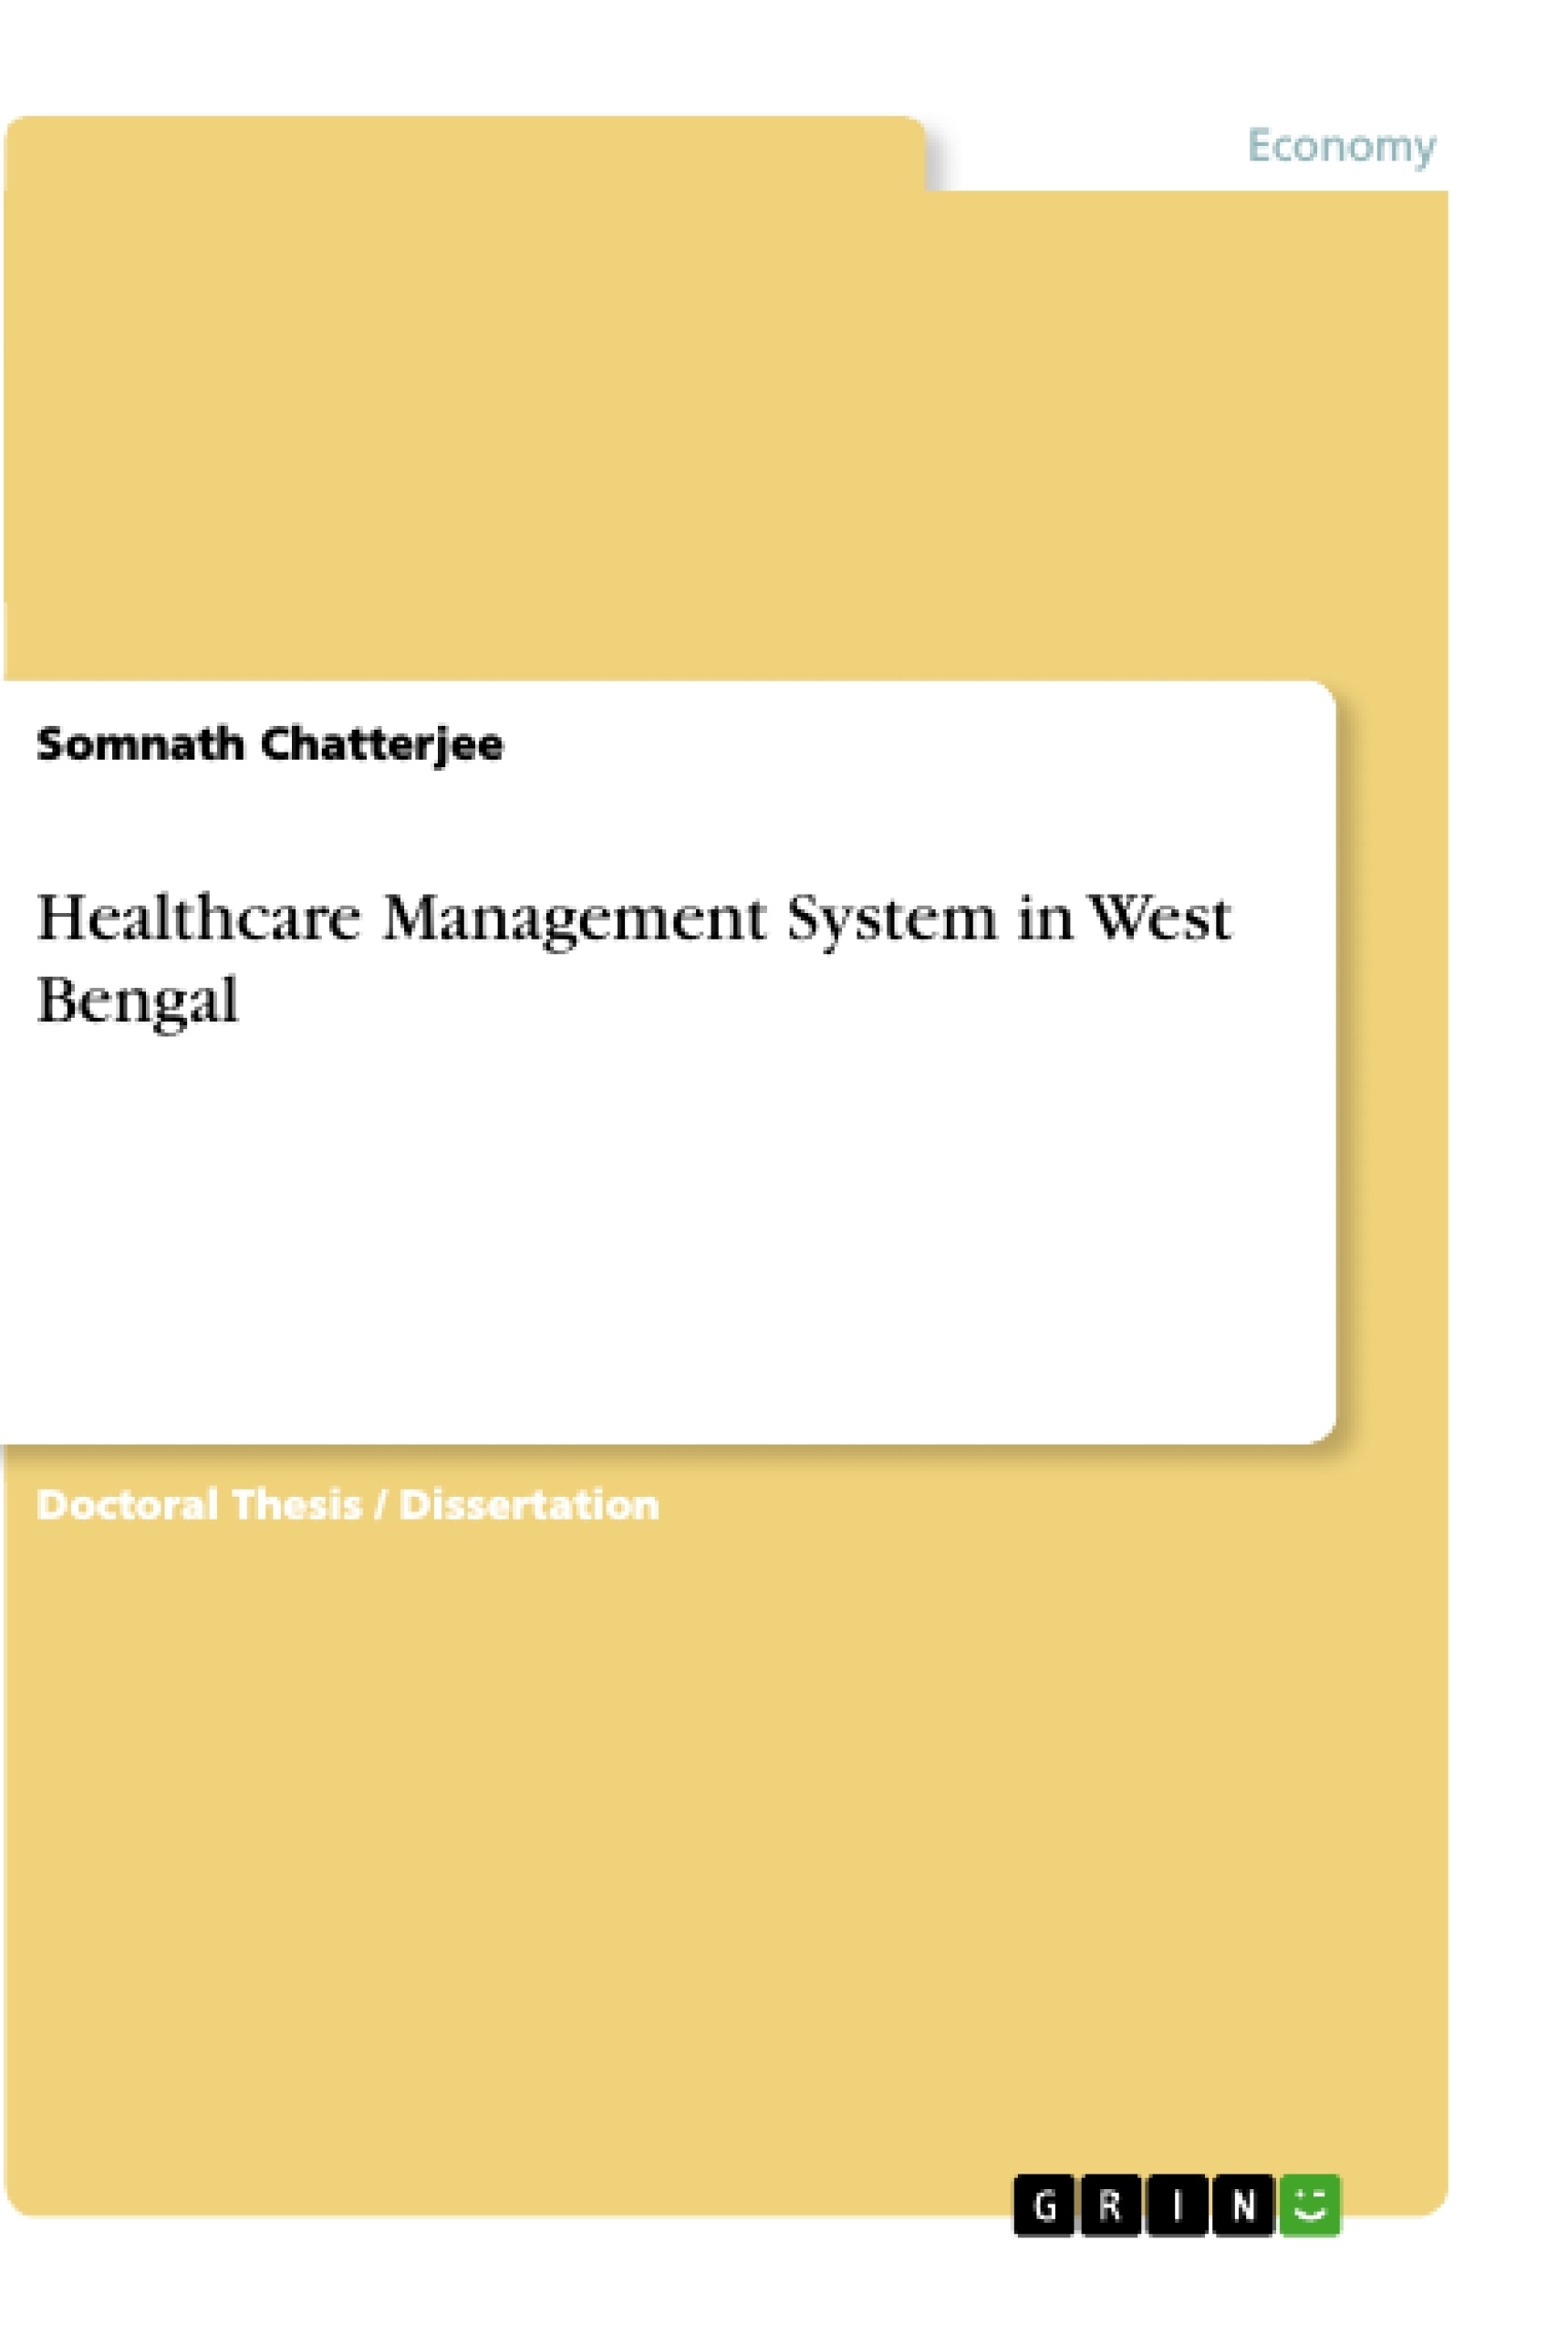 Title: Healthcare Management System in West Bengal